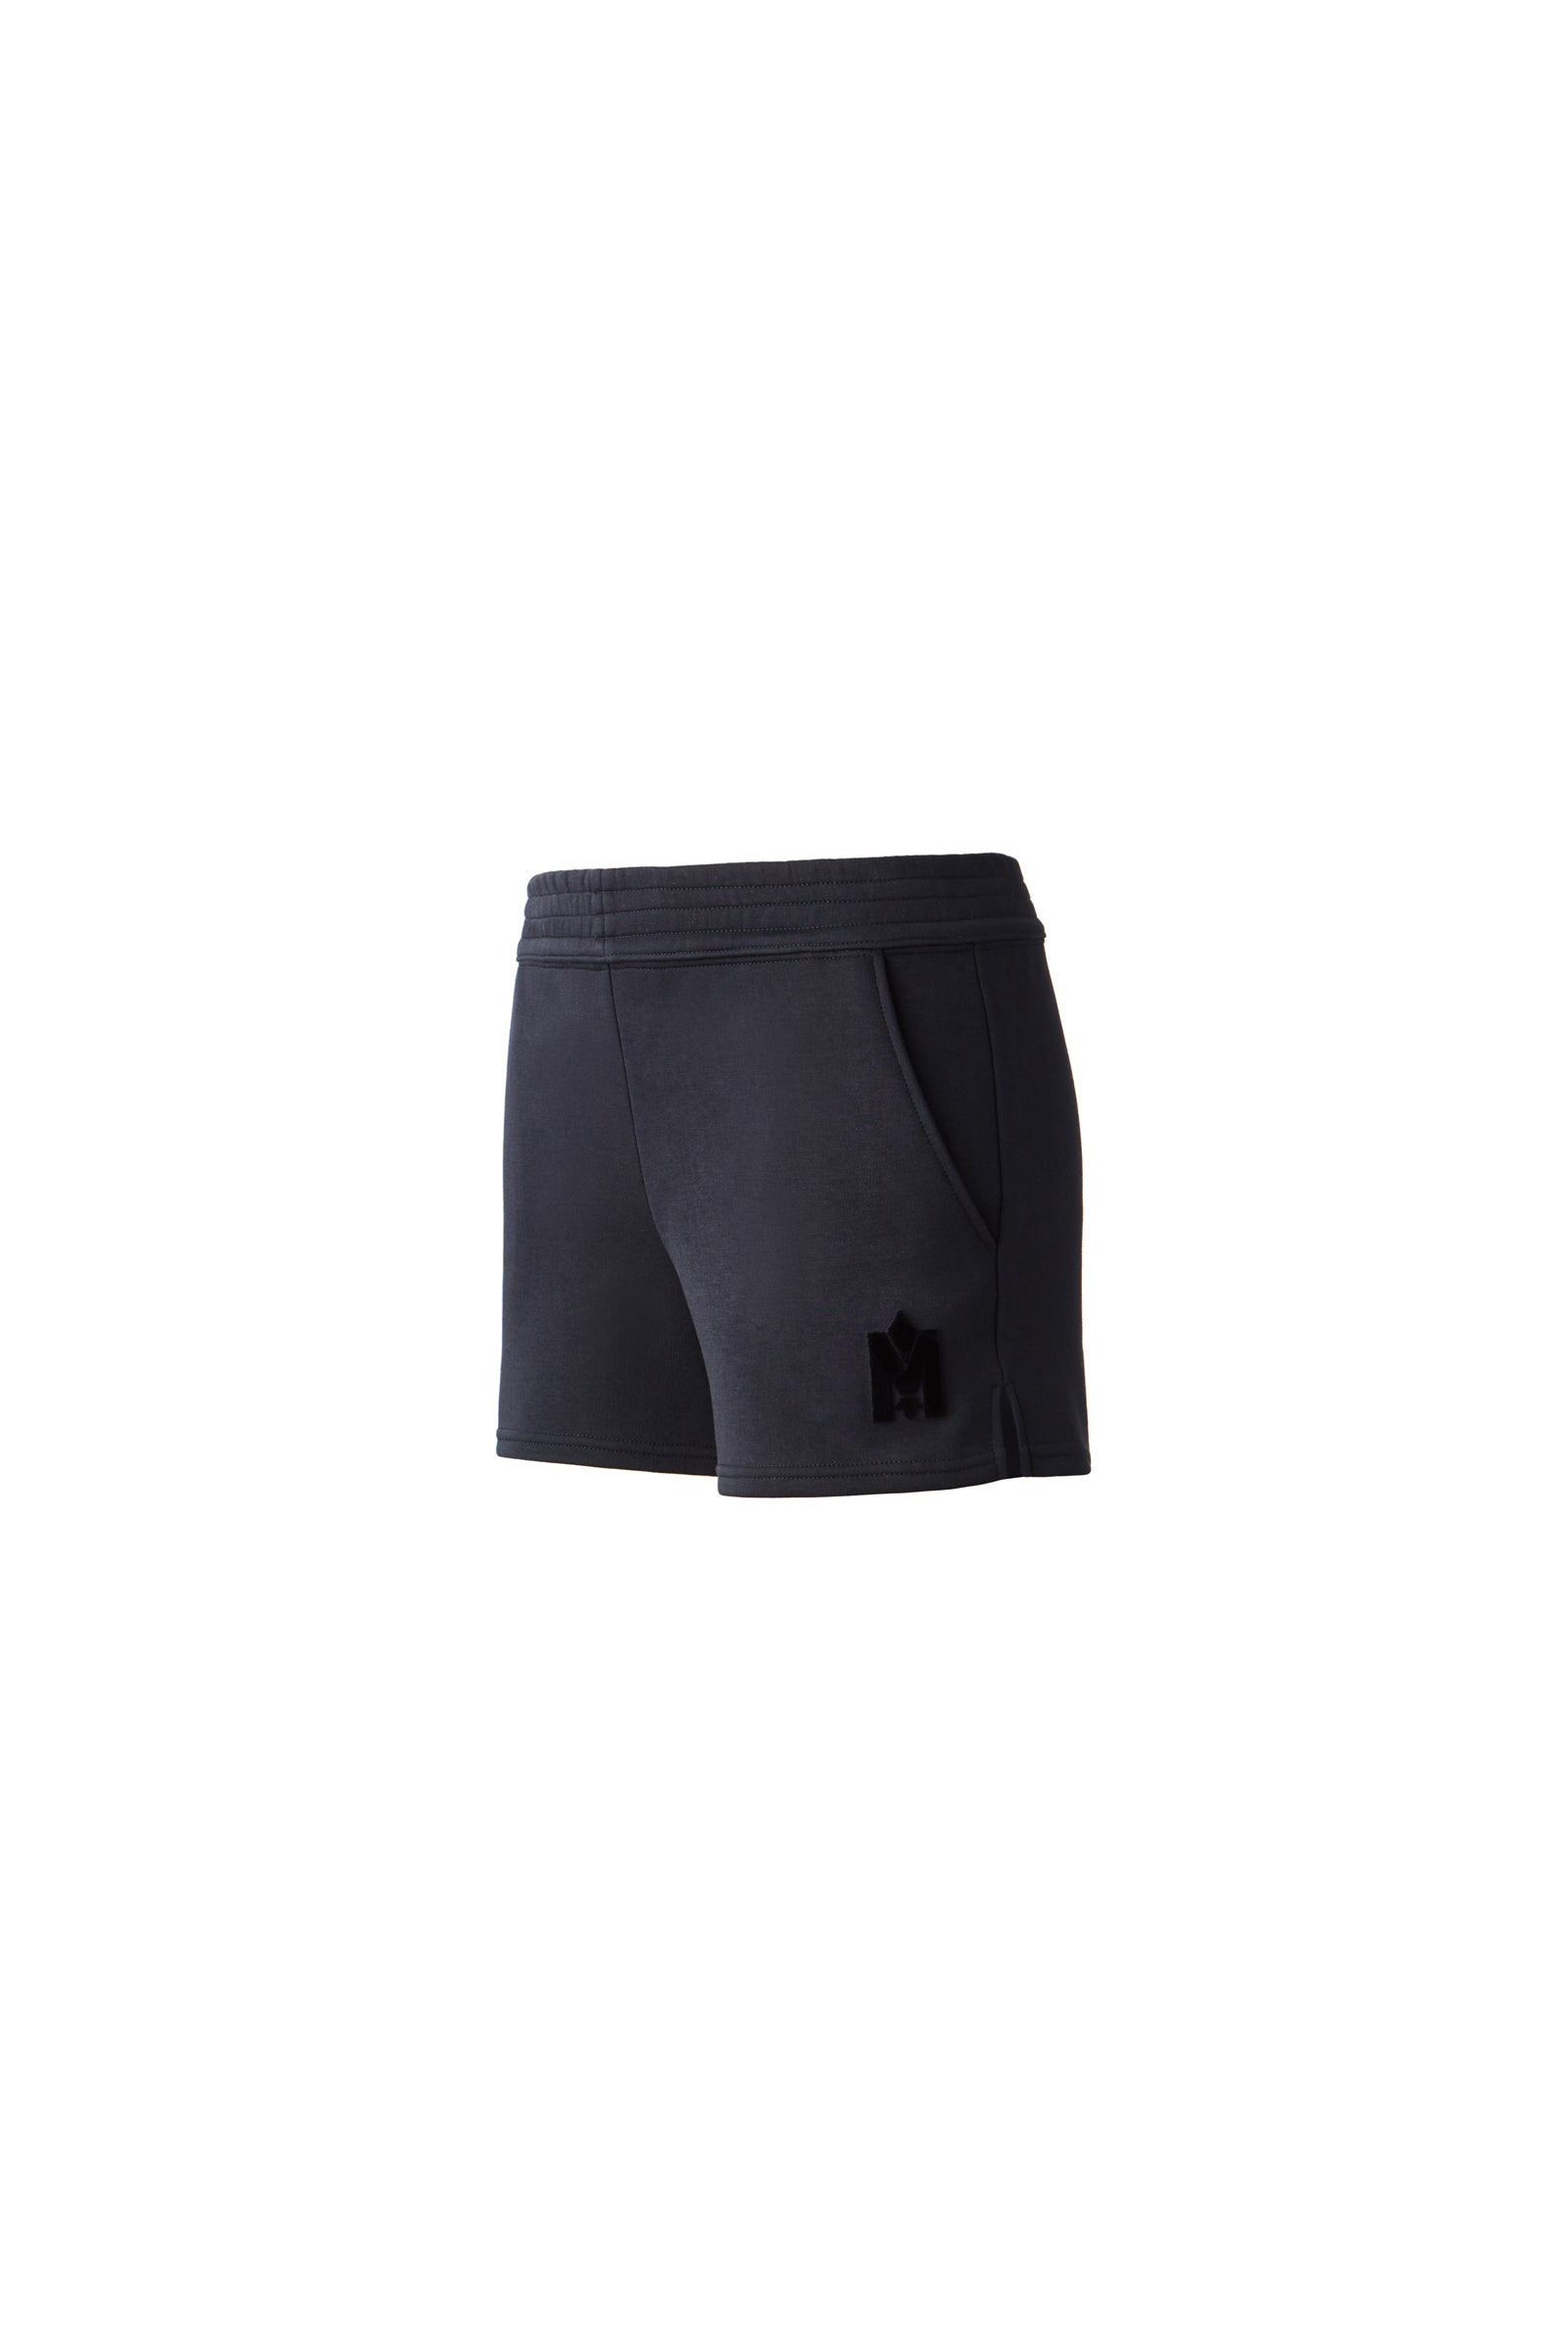 Mackage Summer Double-face Jersey Mini Shorts Size: